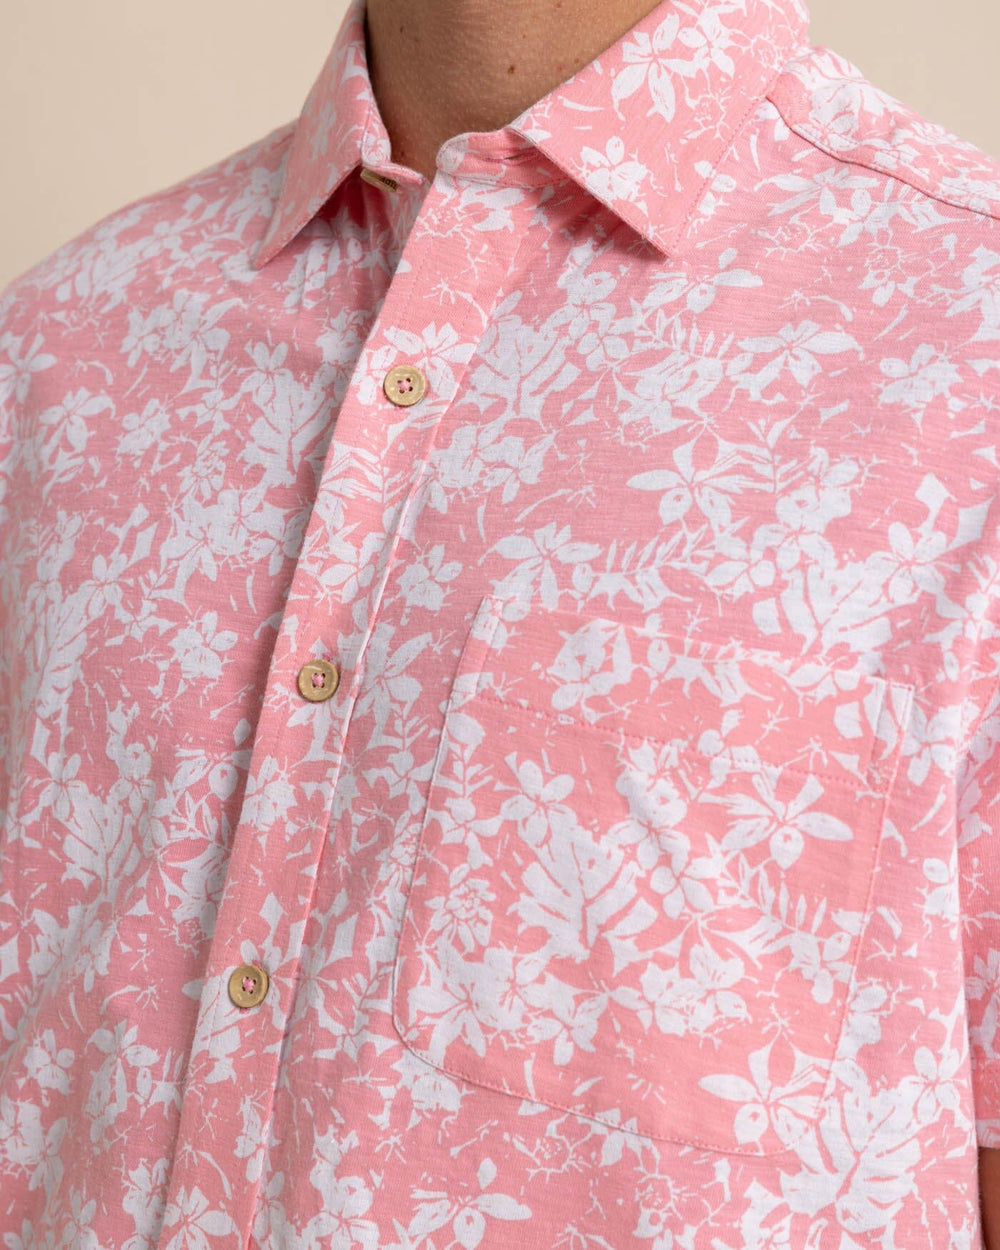 The detail view of the Southern Tide Beachcast Island Blooms Knit Short Sleeve Sport Shirt by Southern Tide - Geranium Pink